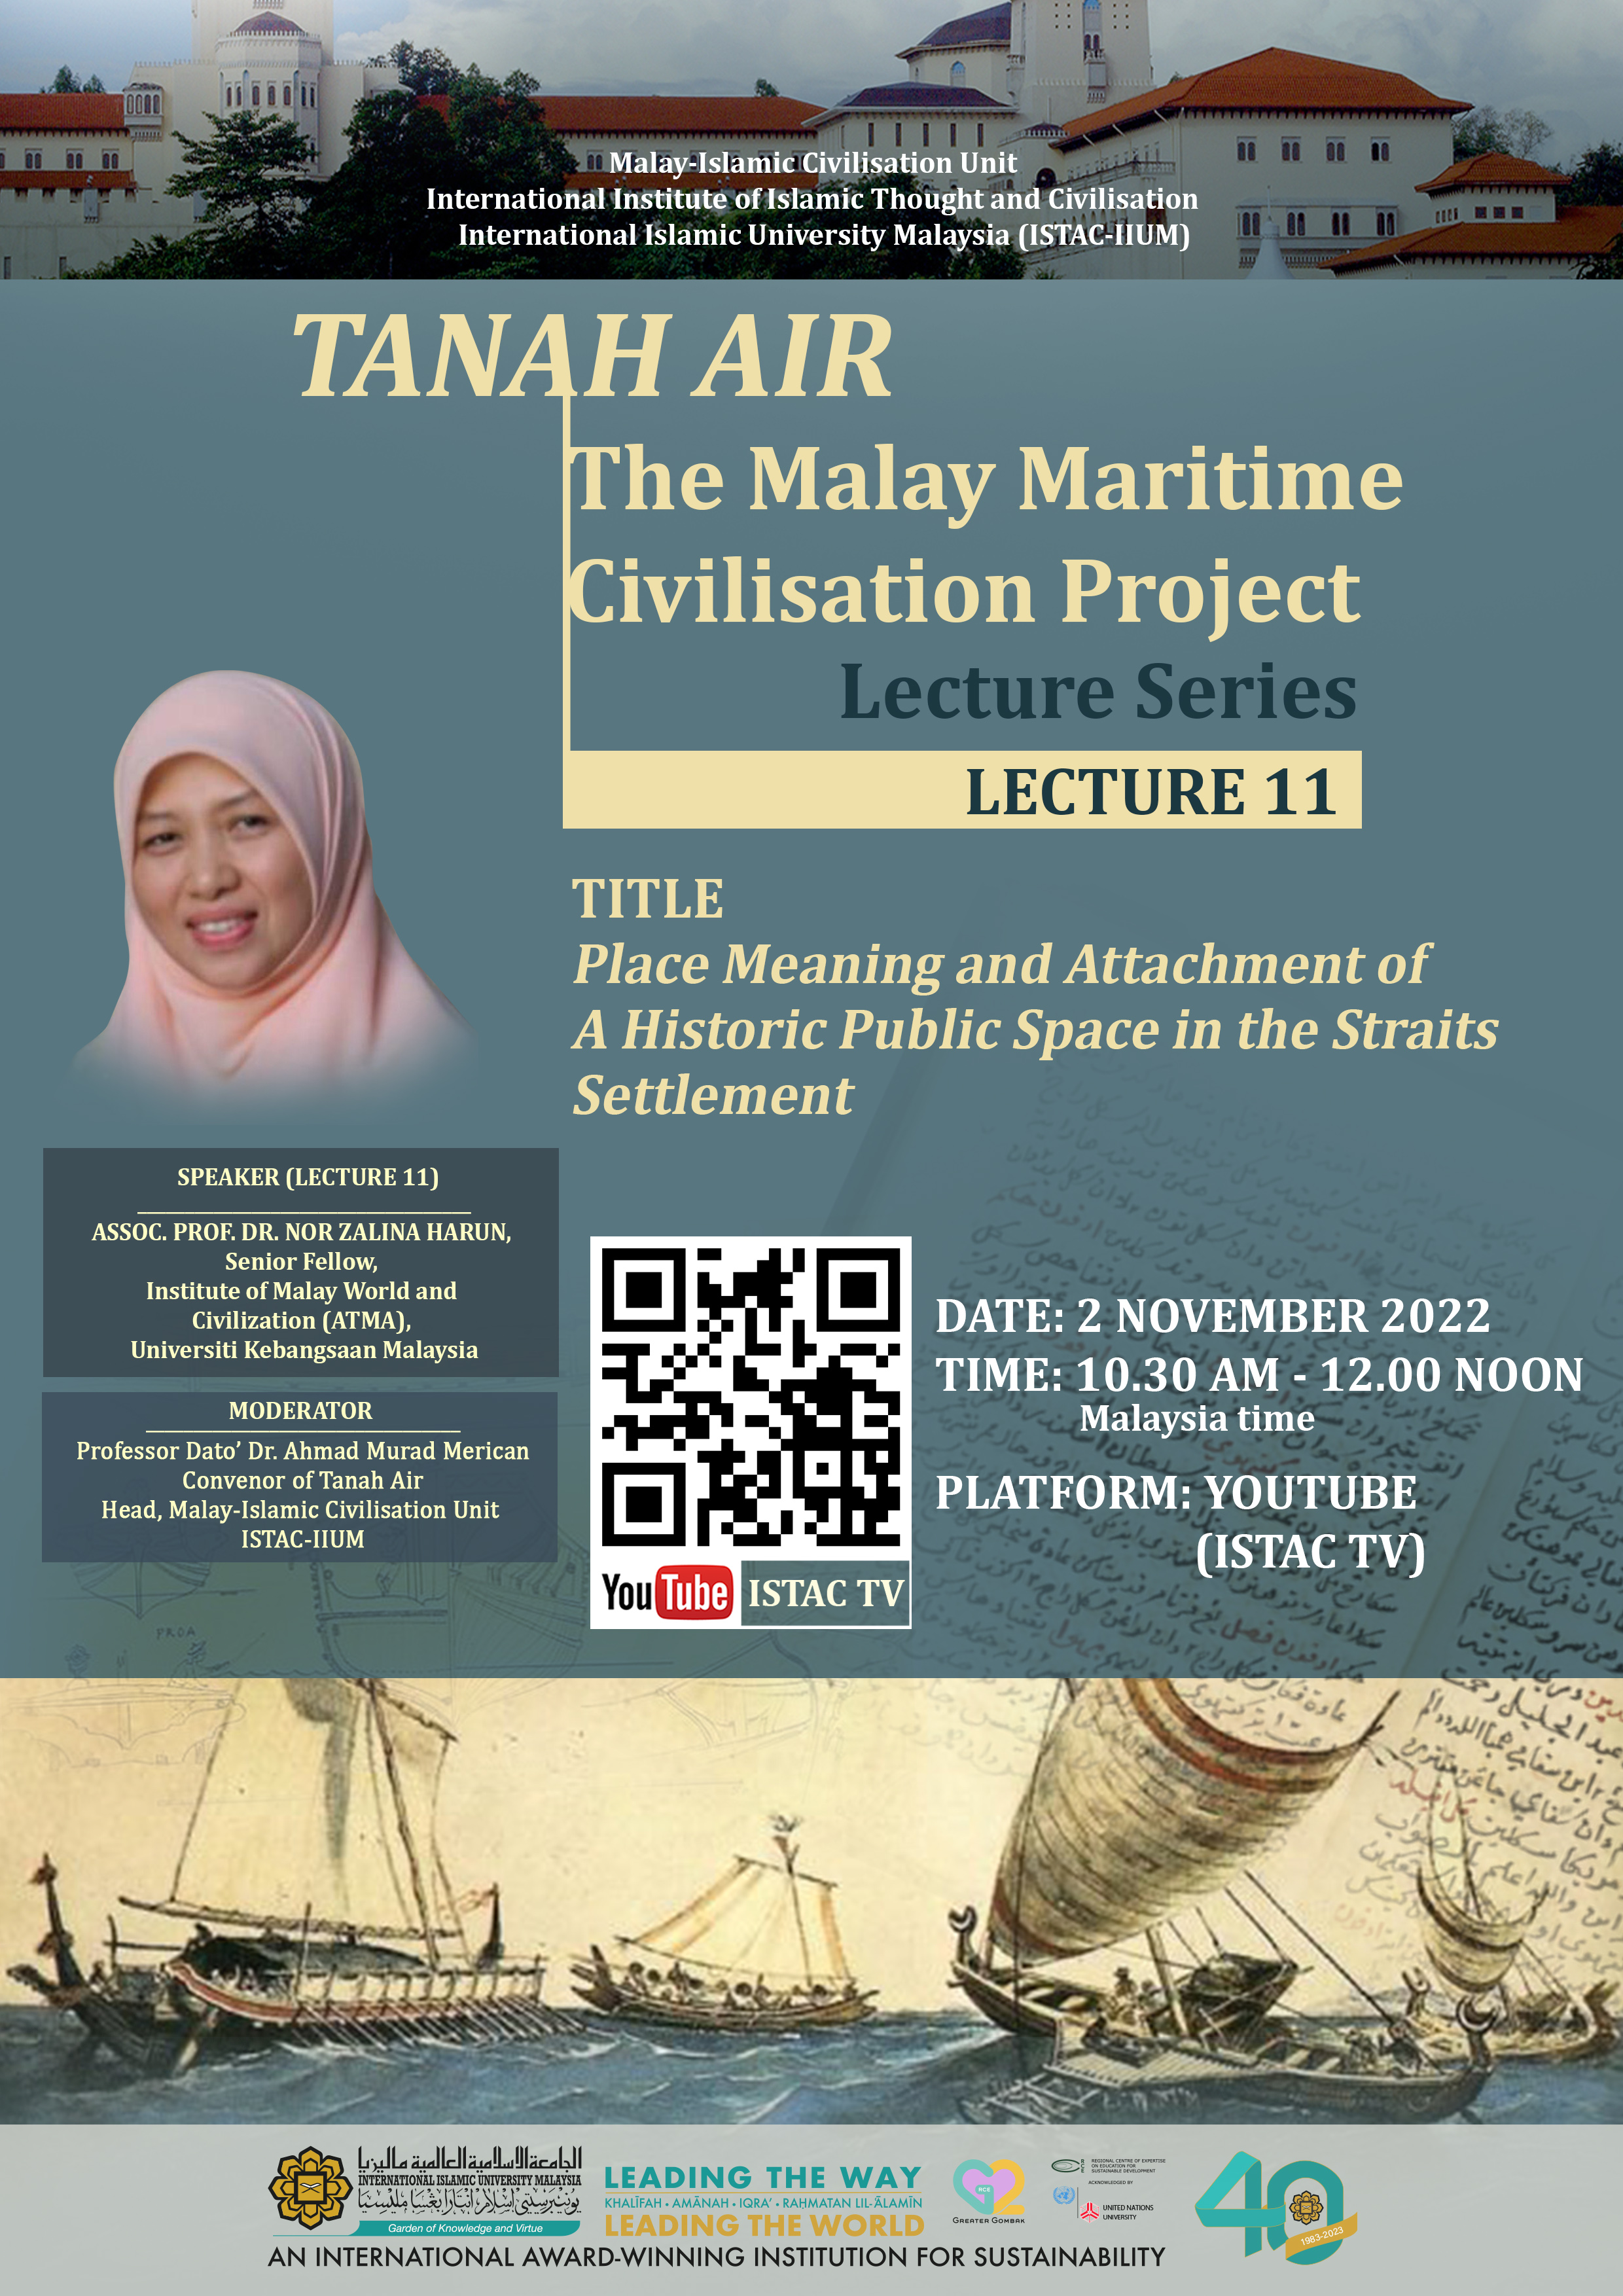 THE ELEVENTH LECTURE OF TANAH AIR: MALAY MARITIME CIVILISATION PROJECT